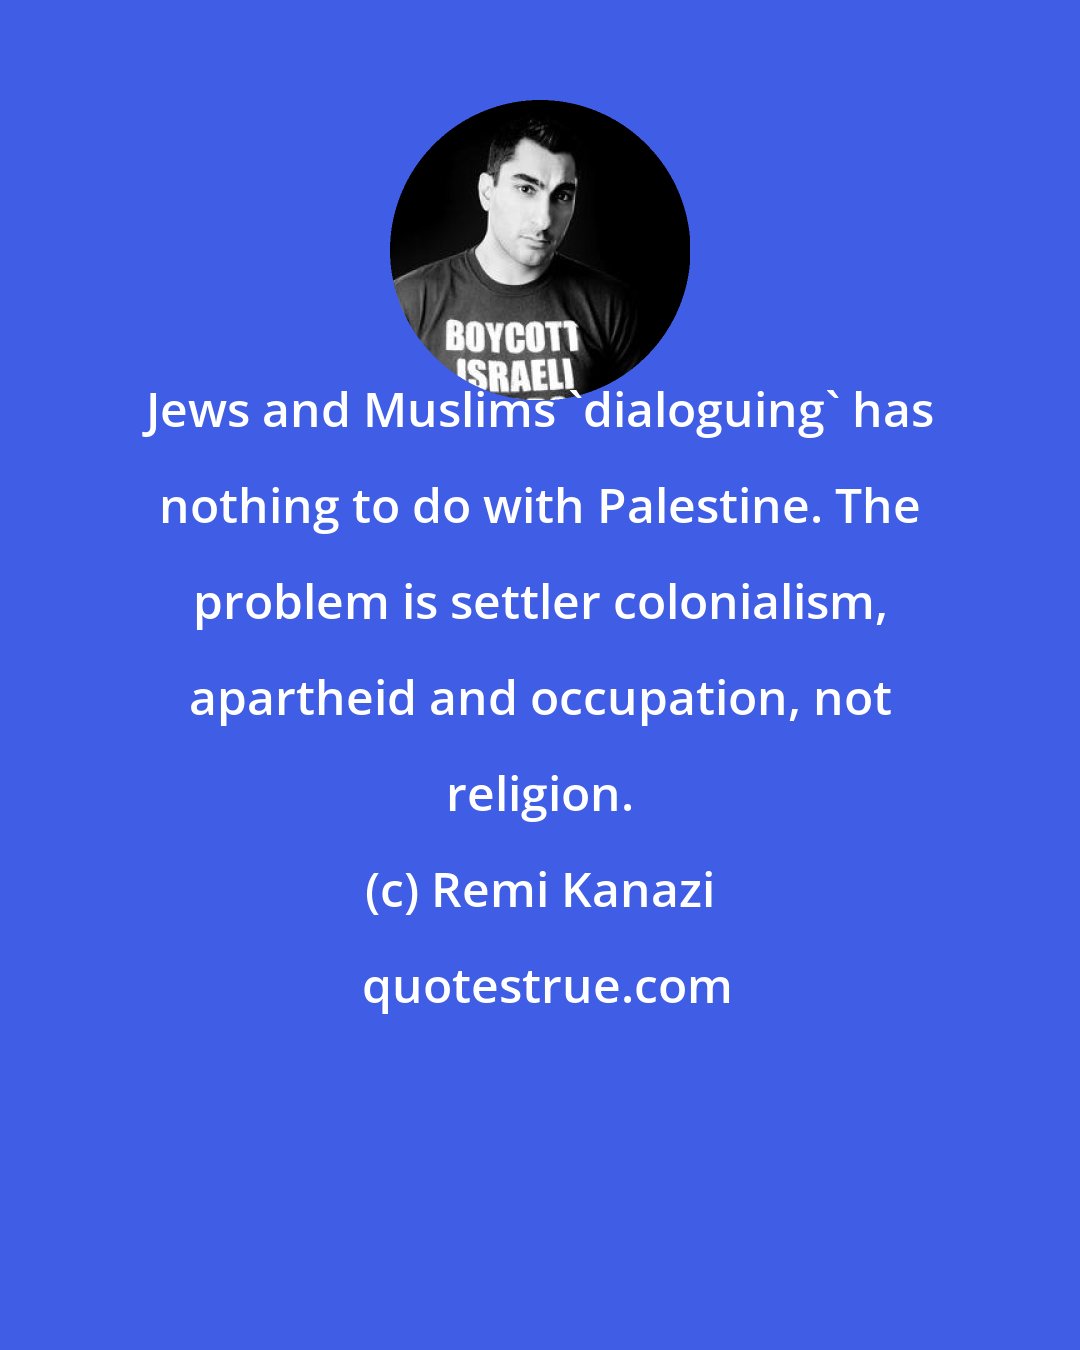 Remi Kanazi: Jews and Muslims 'dialoguing' has nothing to do with Palestine. The problem is settler colonialism, apartheid and occupation, not religion.